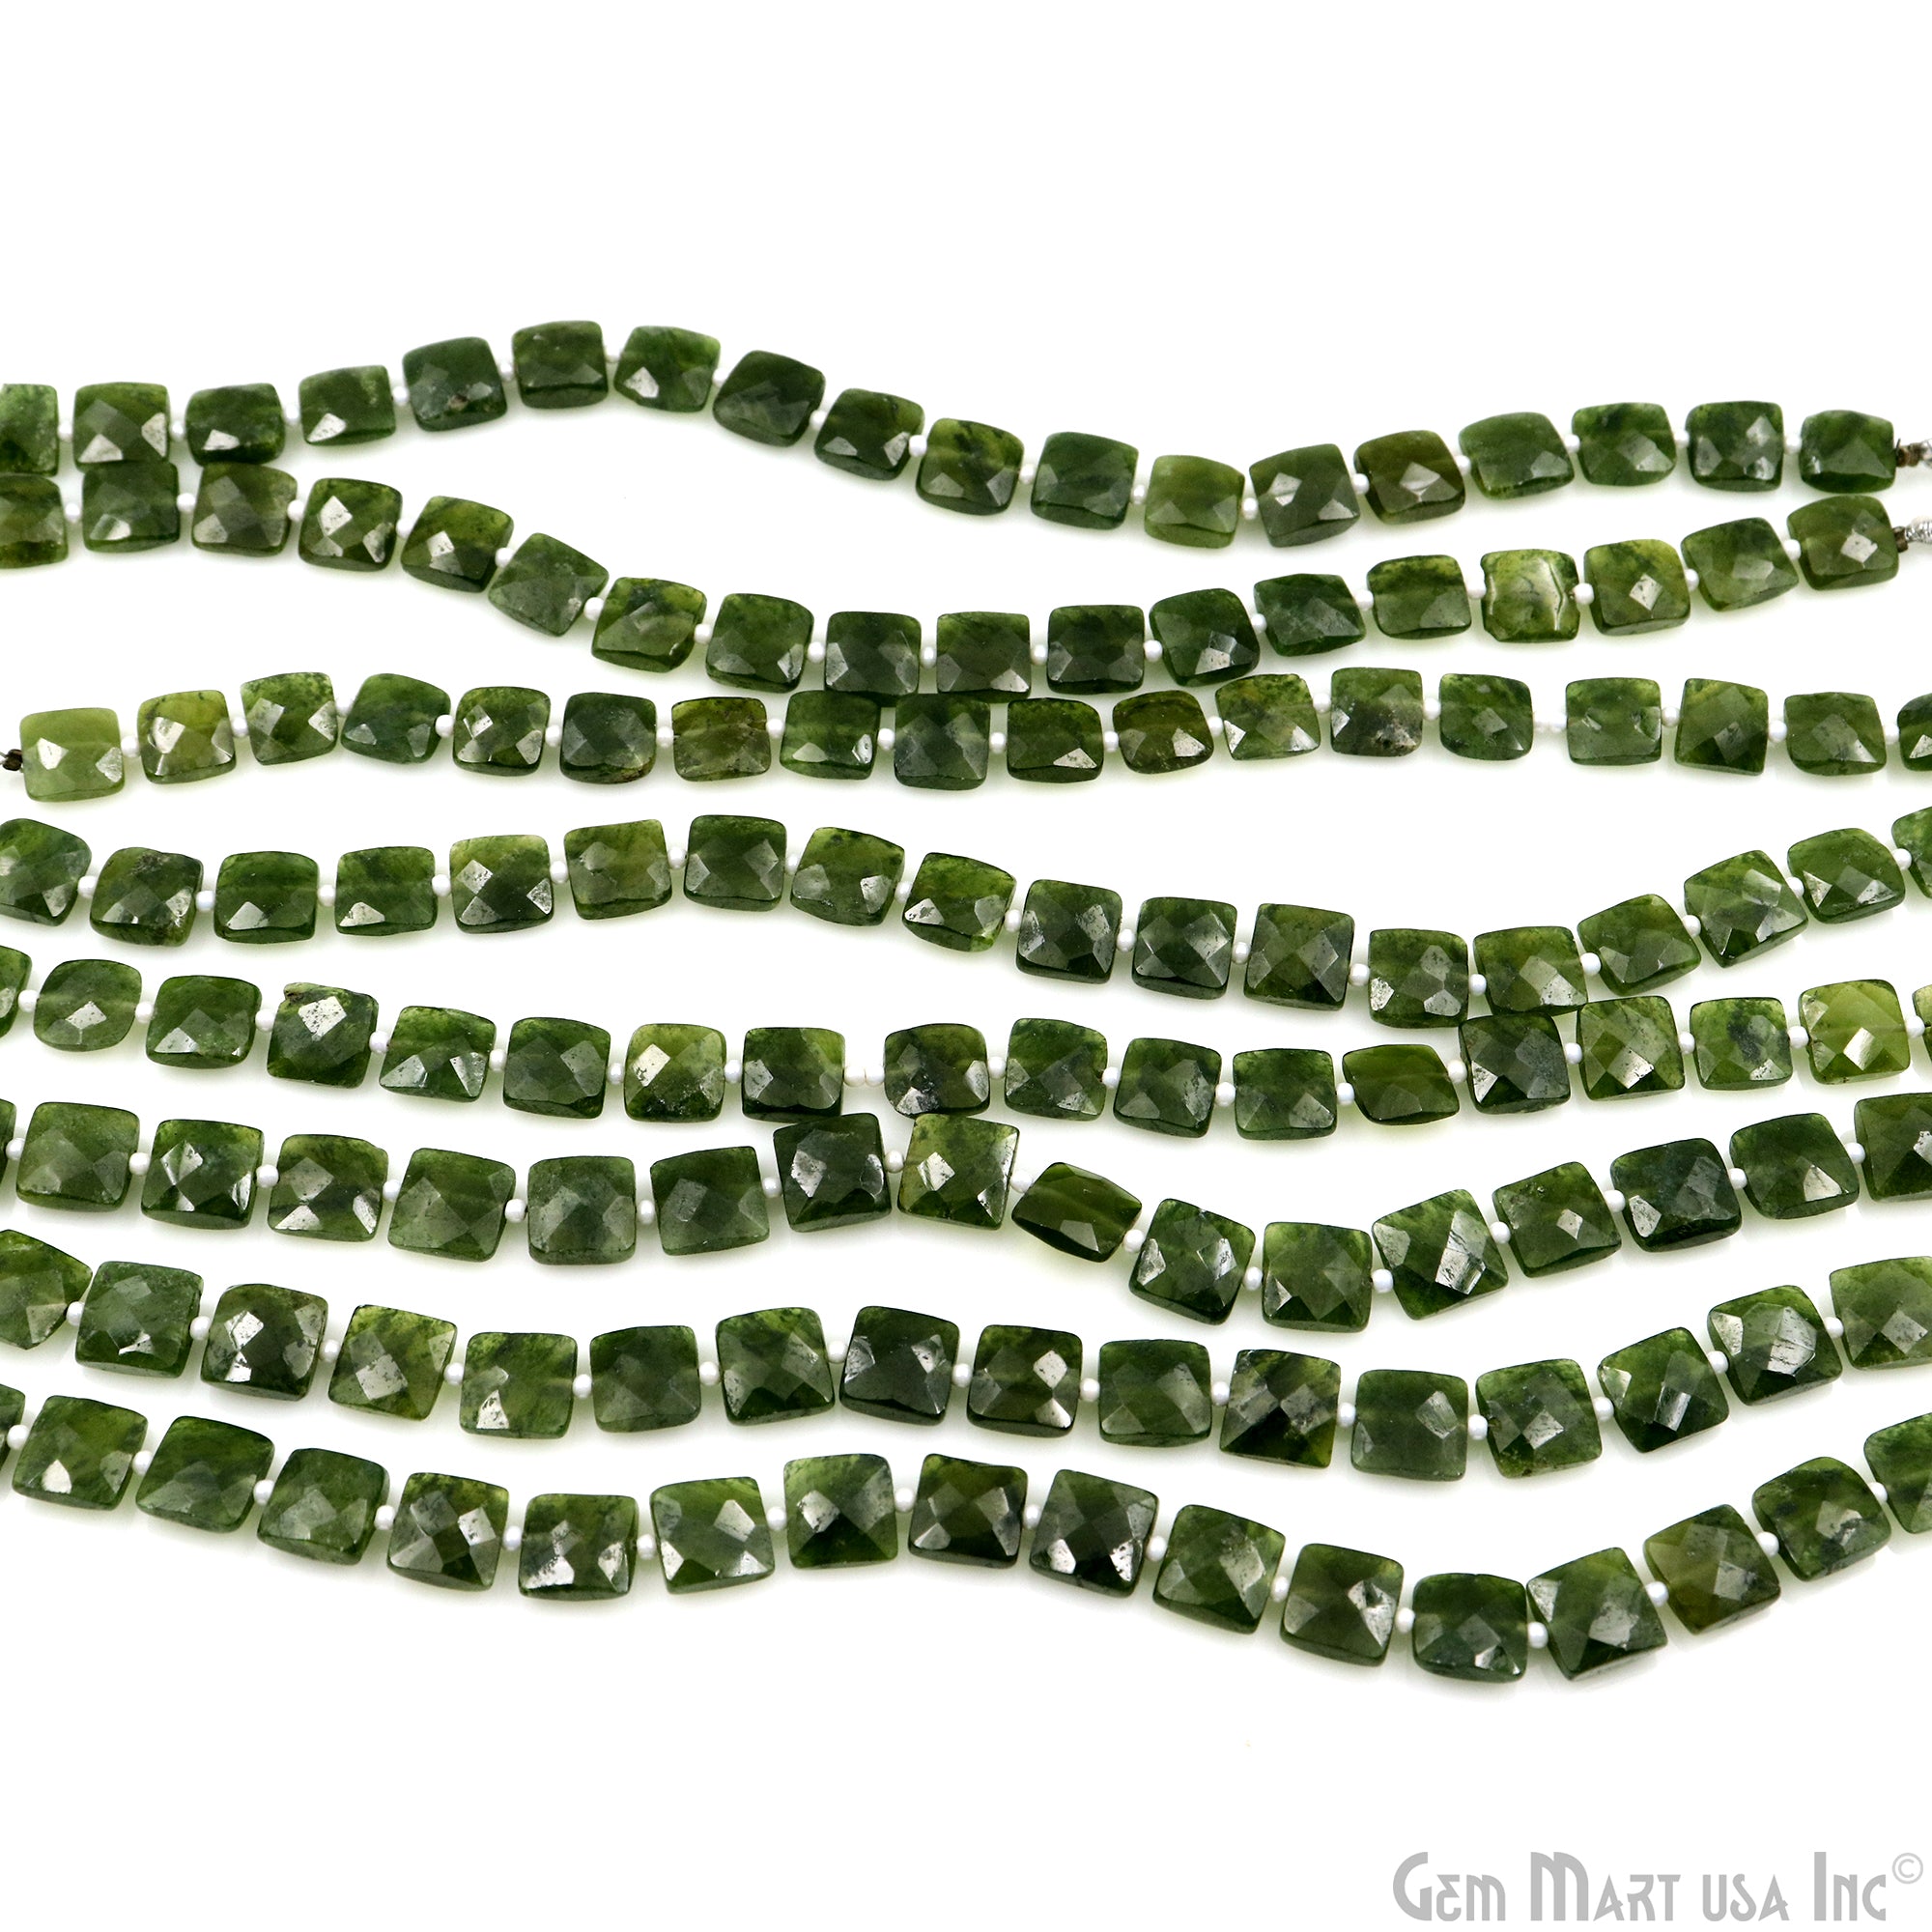 Green Apatite 9mm Square Faceted Rondelle Gemstone Beads Jewelry Making Supplies 7.5 Inch